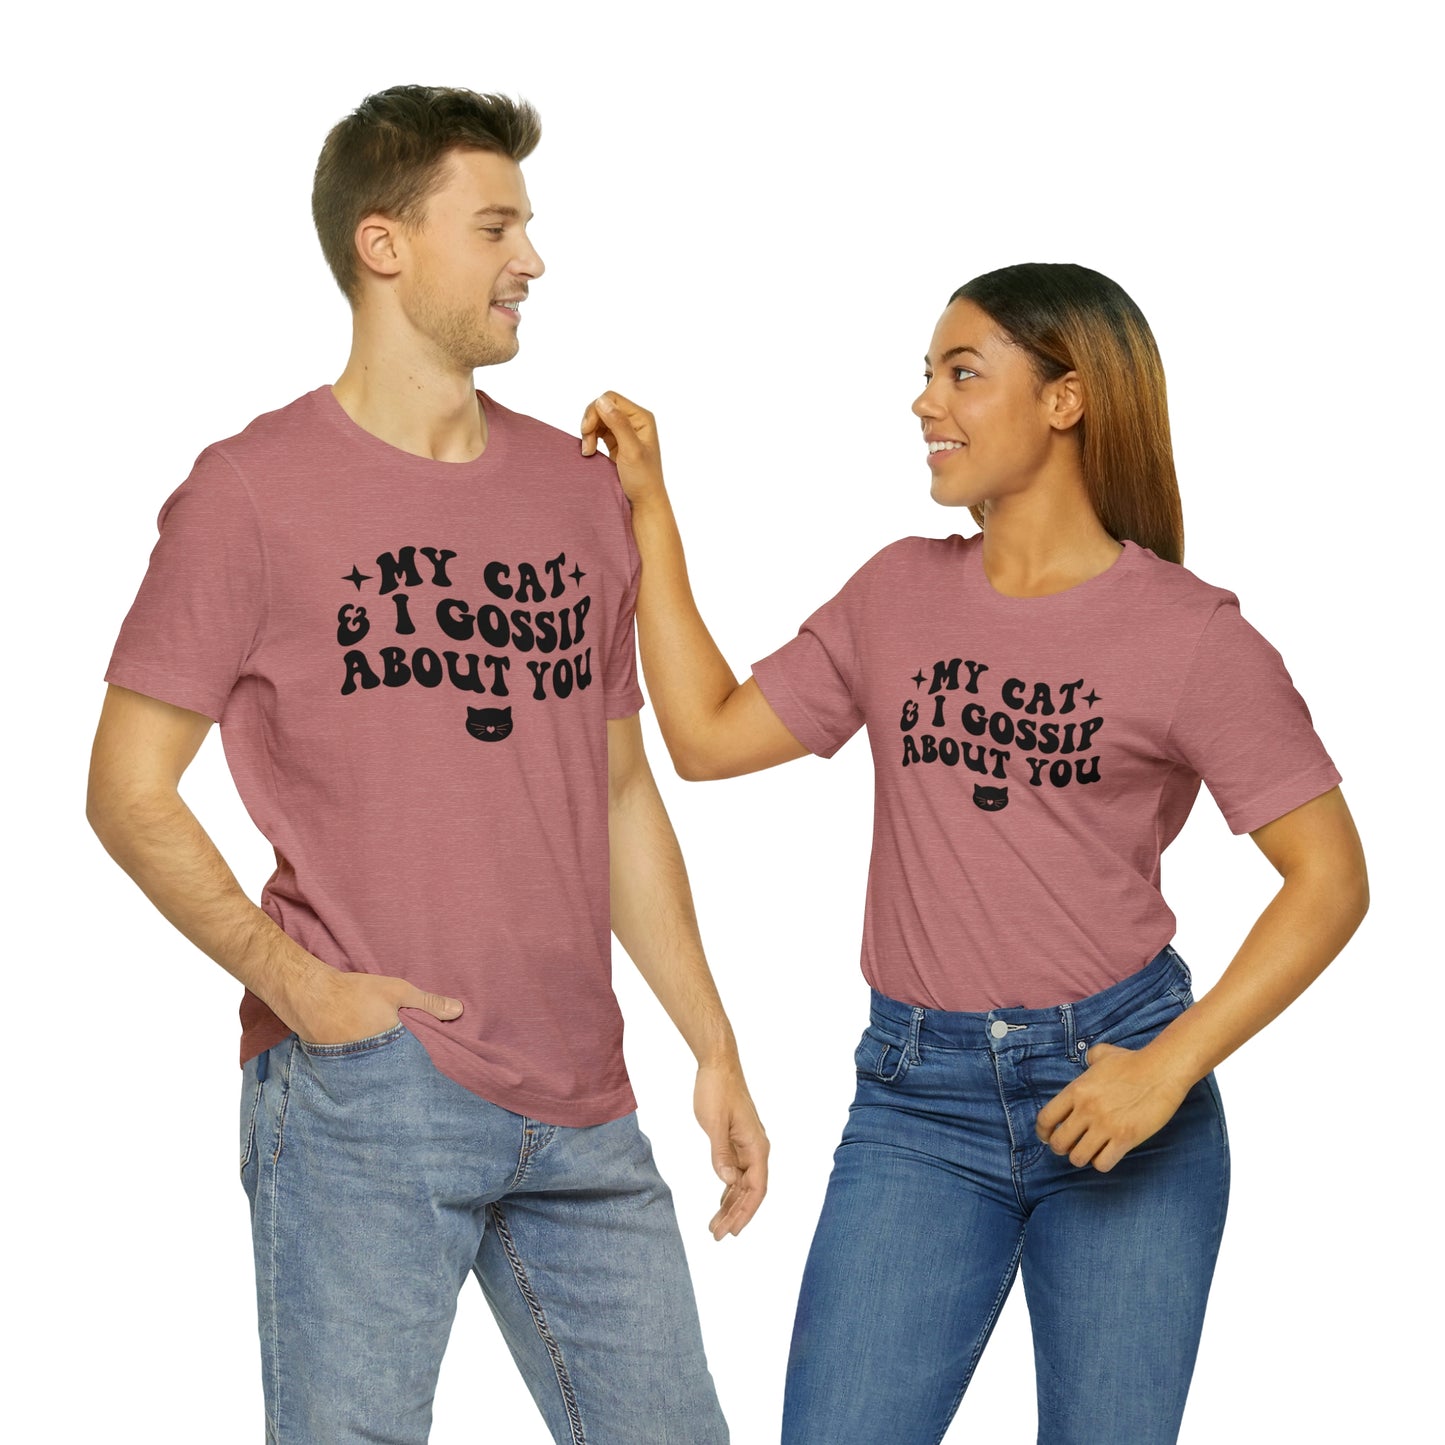 My Cat and I Gossip About You Short Sleeve T-shirt